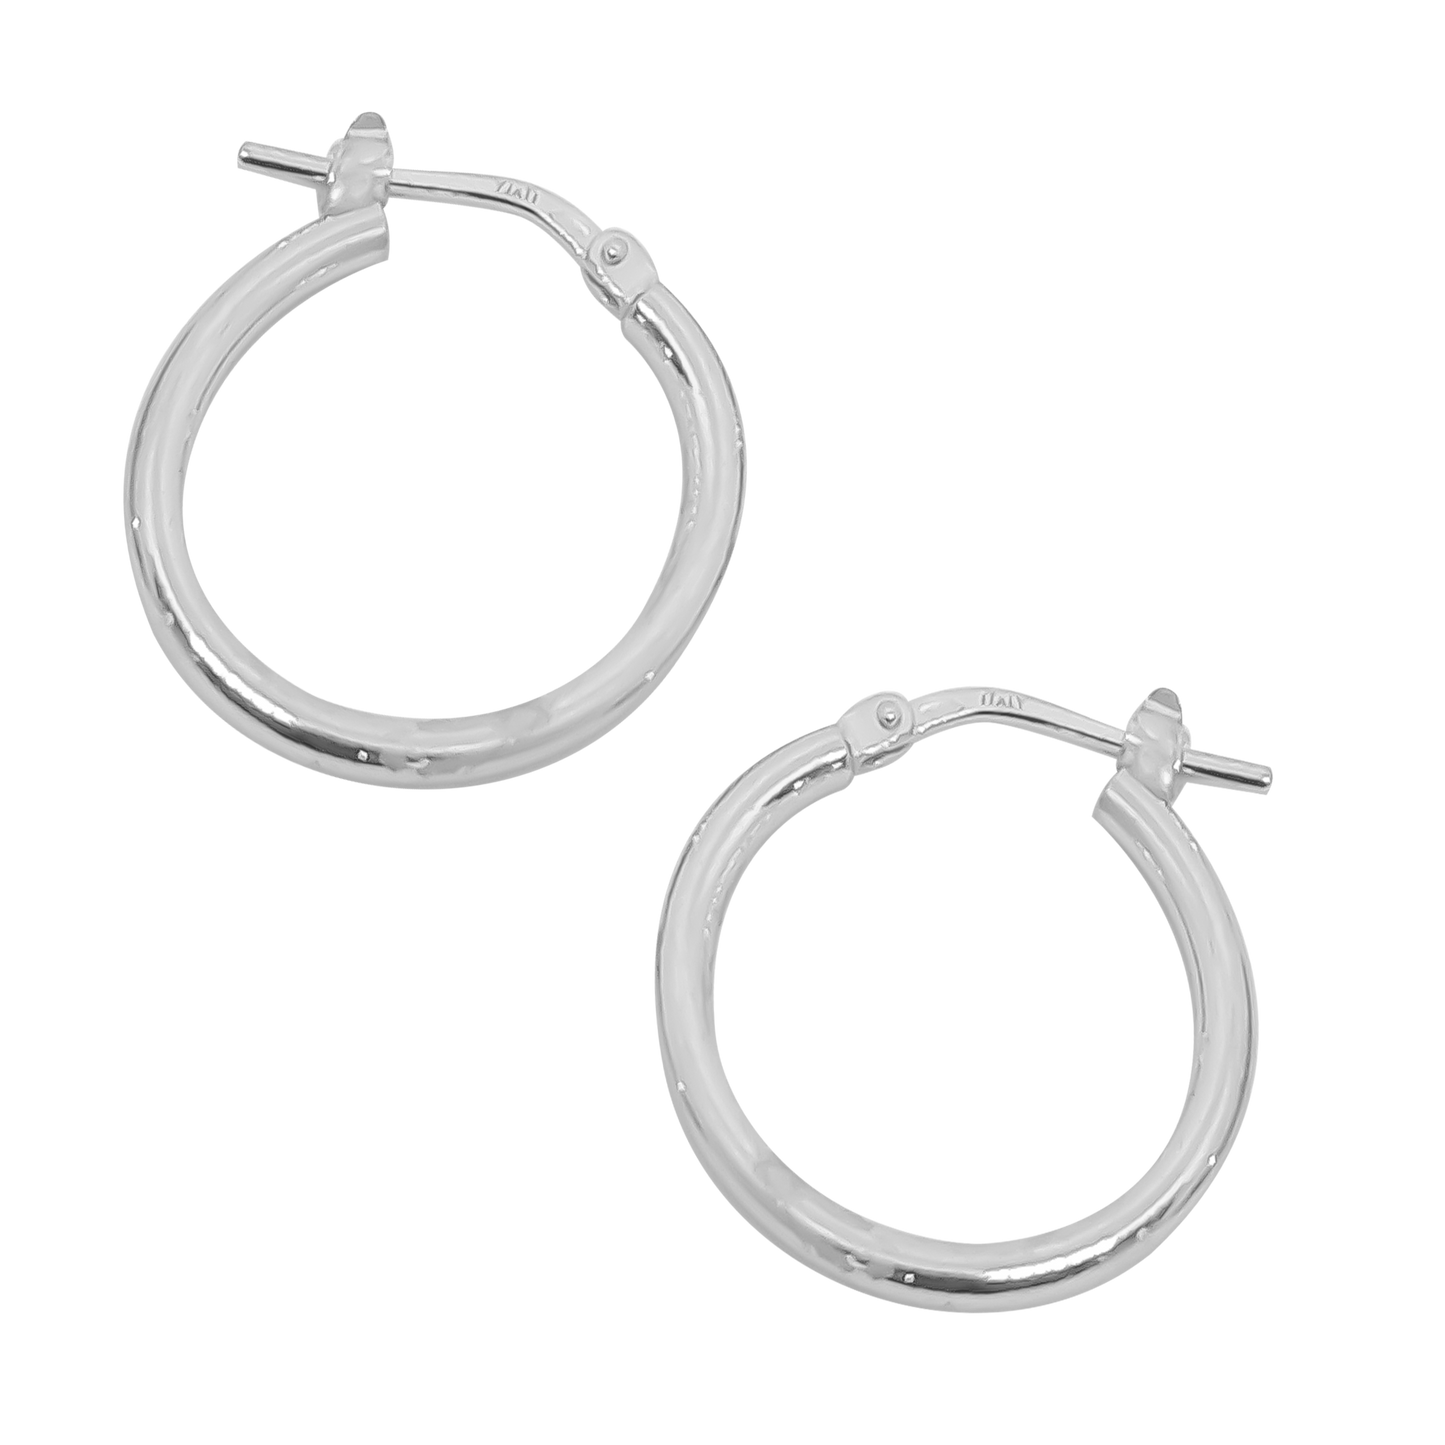 1.8cm Small Hoops in 925 Sterling Silver